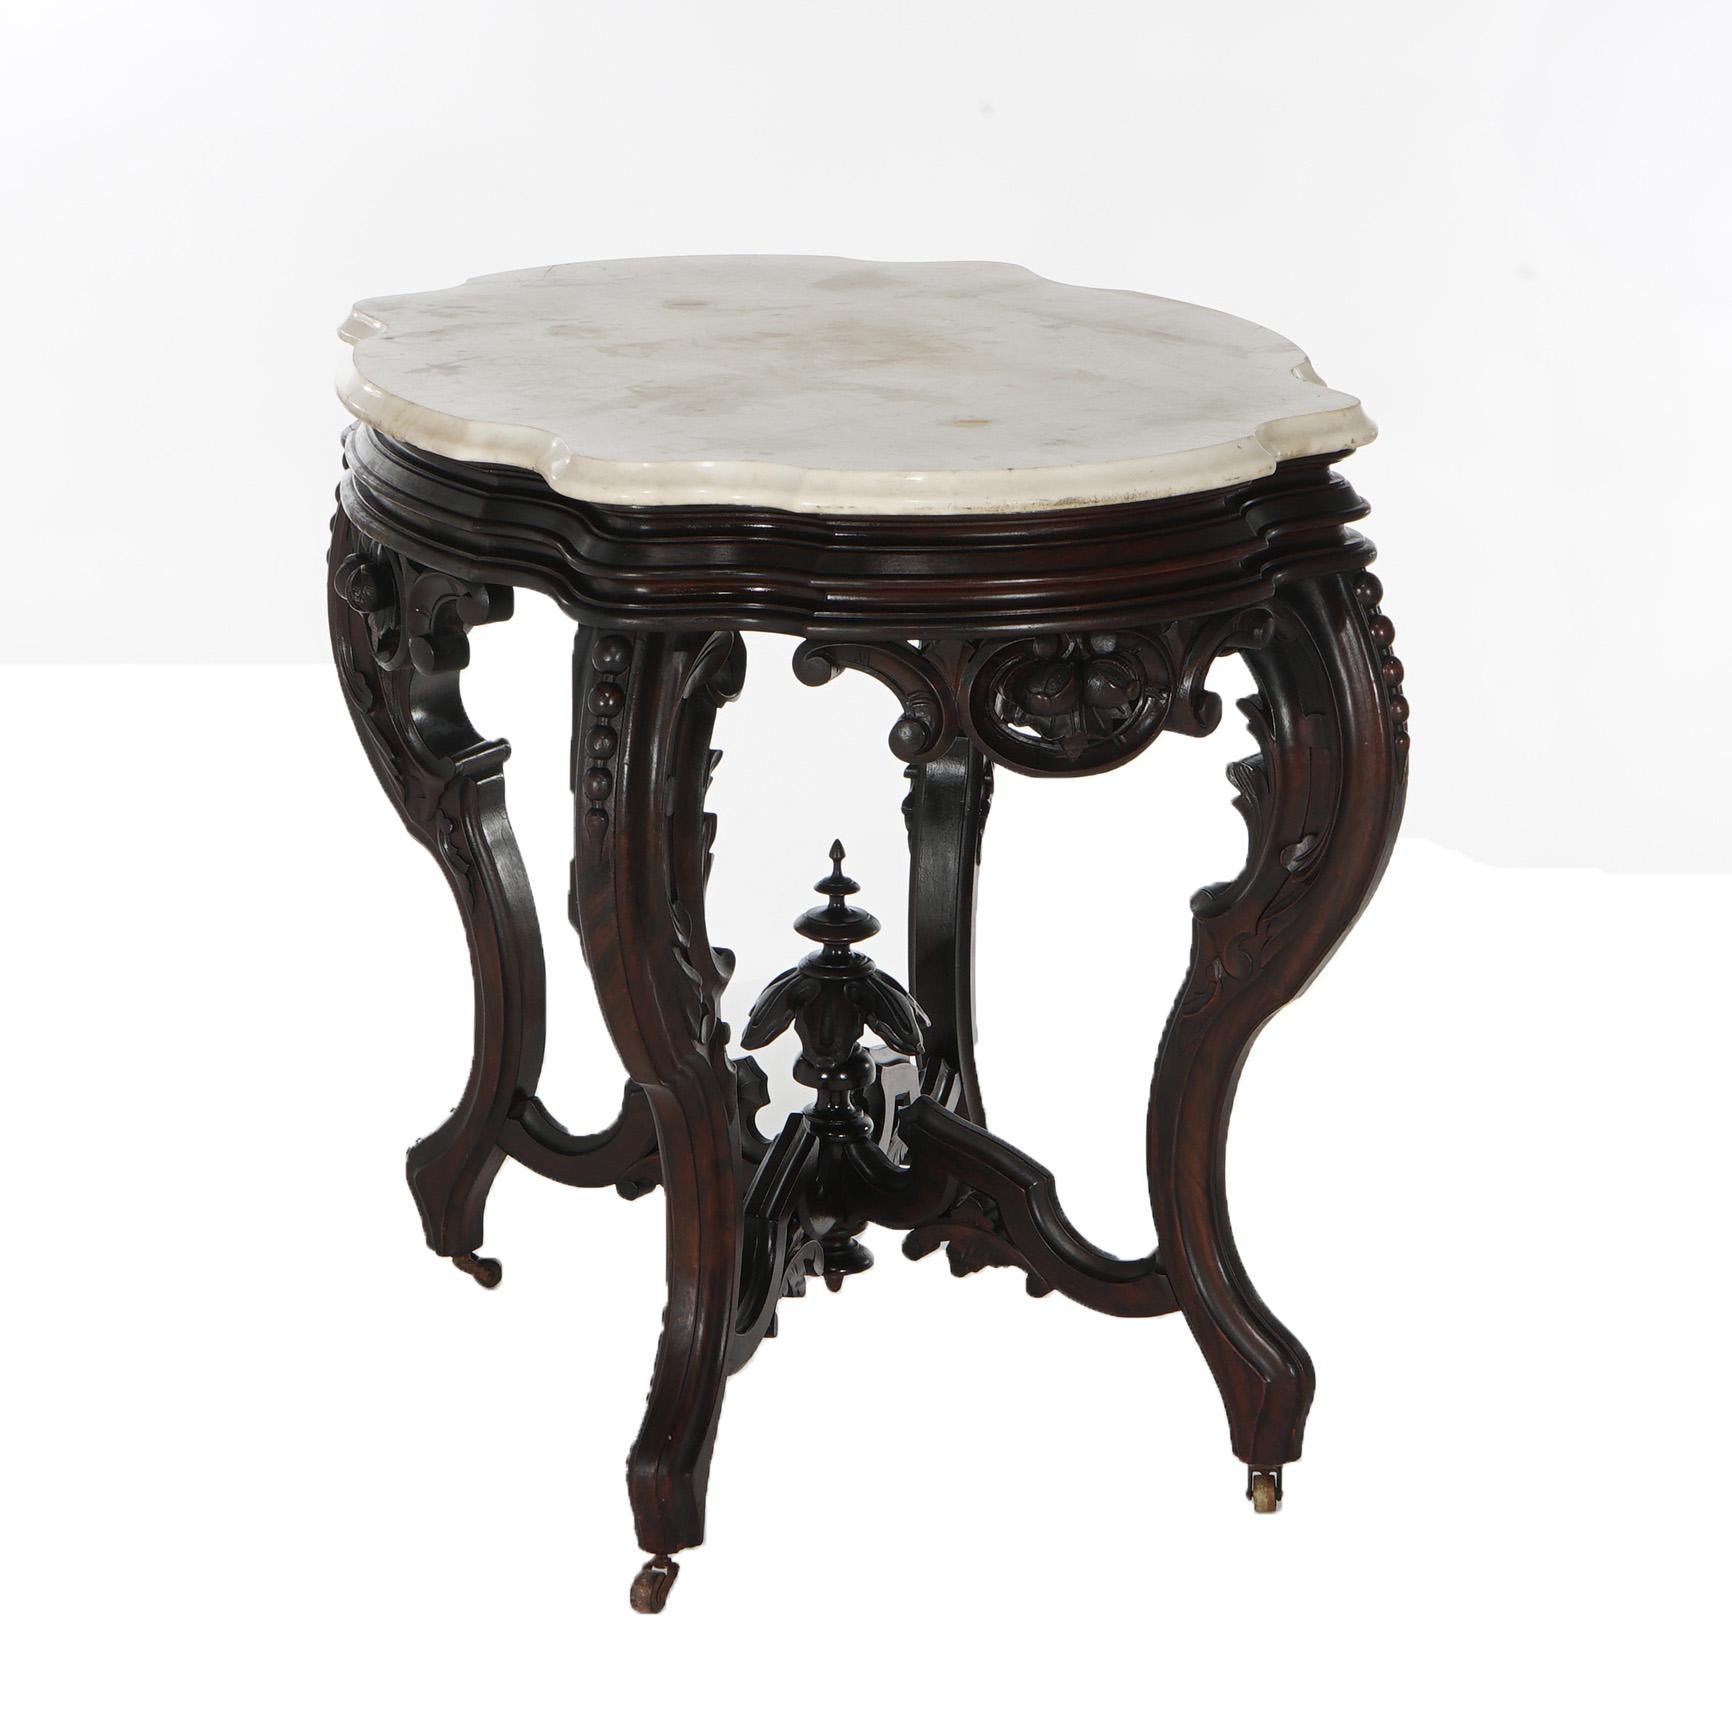 Antique Brooks Victorian Heavily Carved Walnut & Marble Turtle Top Table C1870 For Sale 8